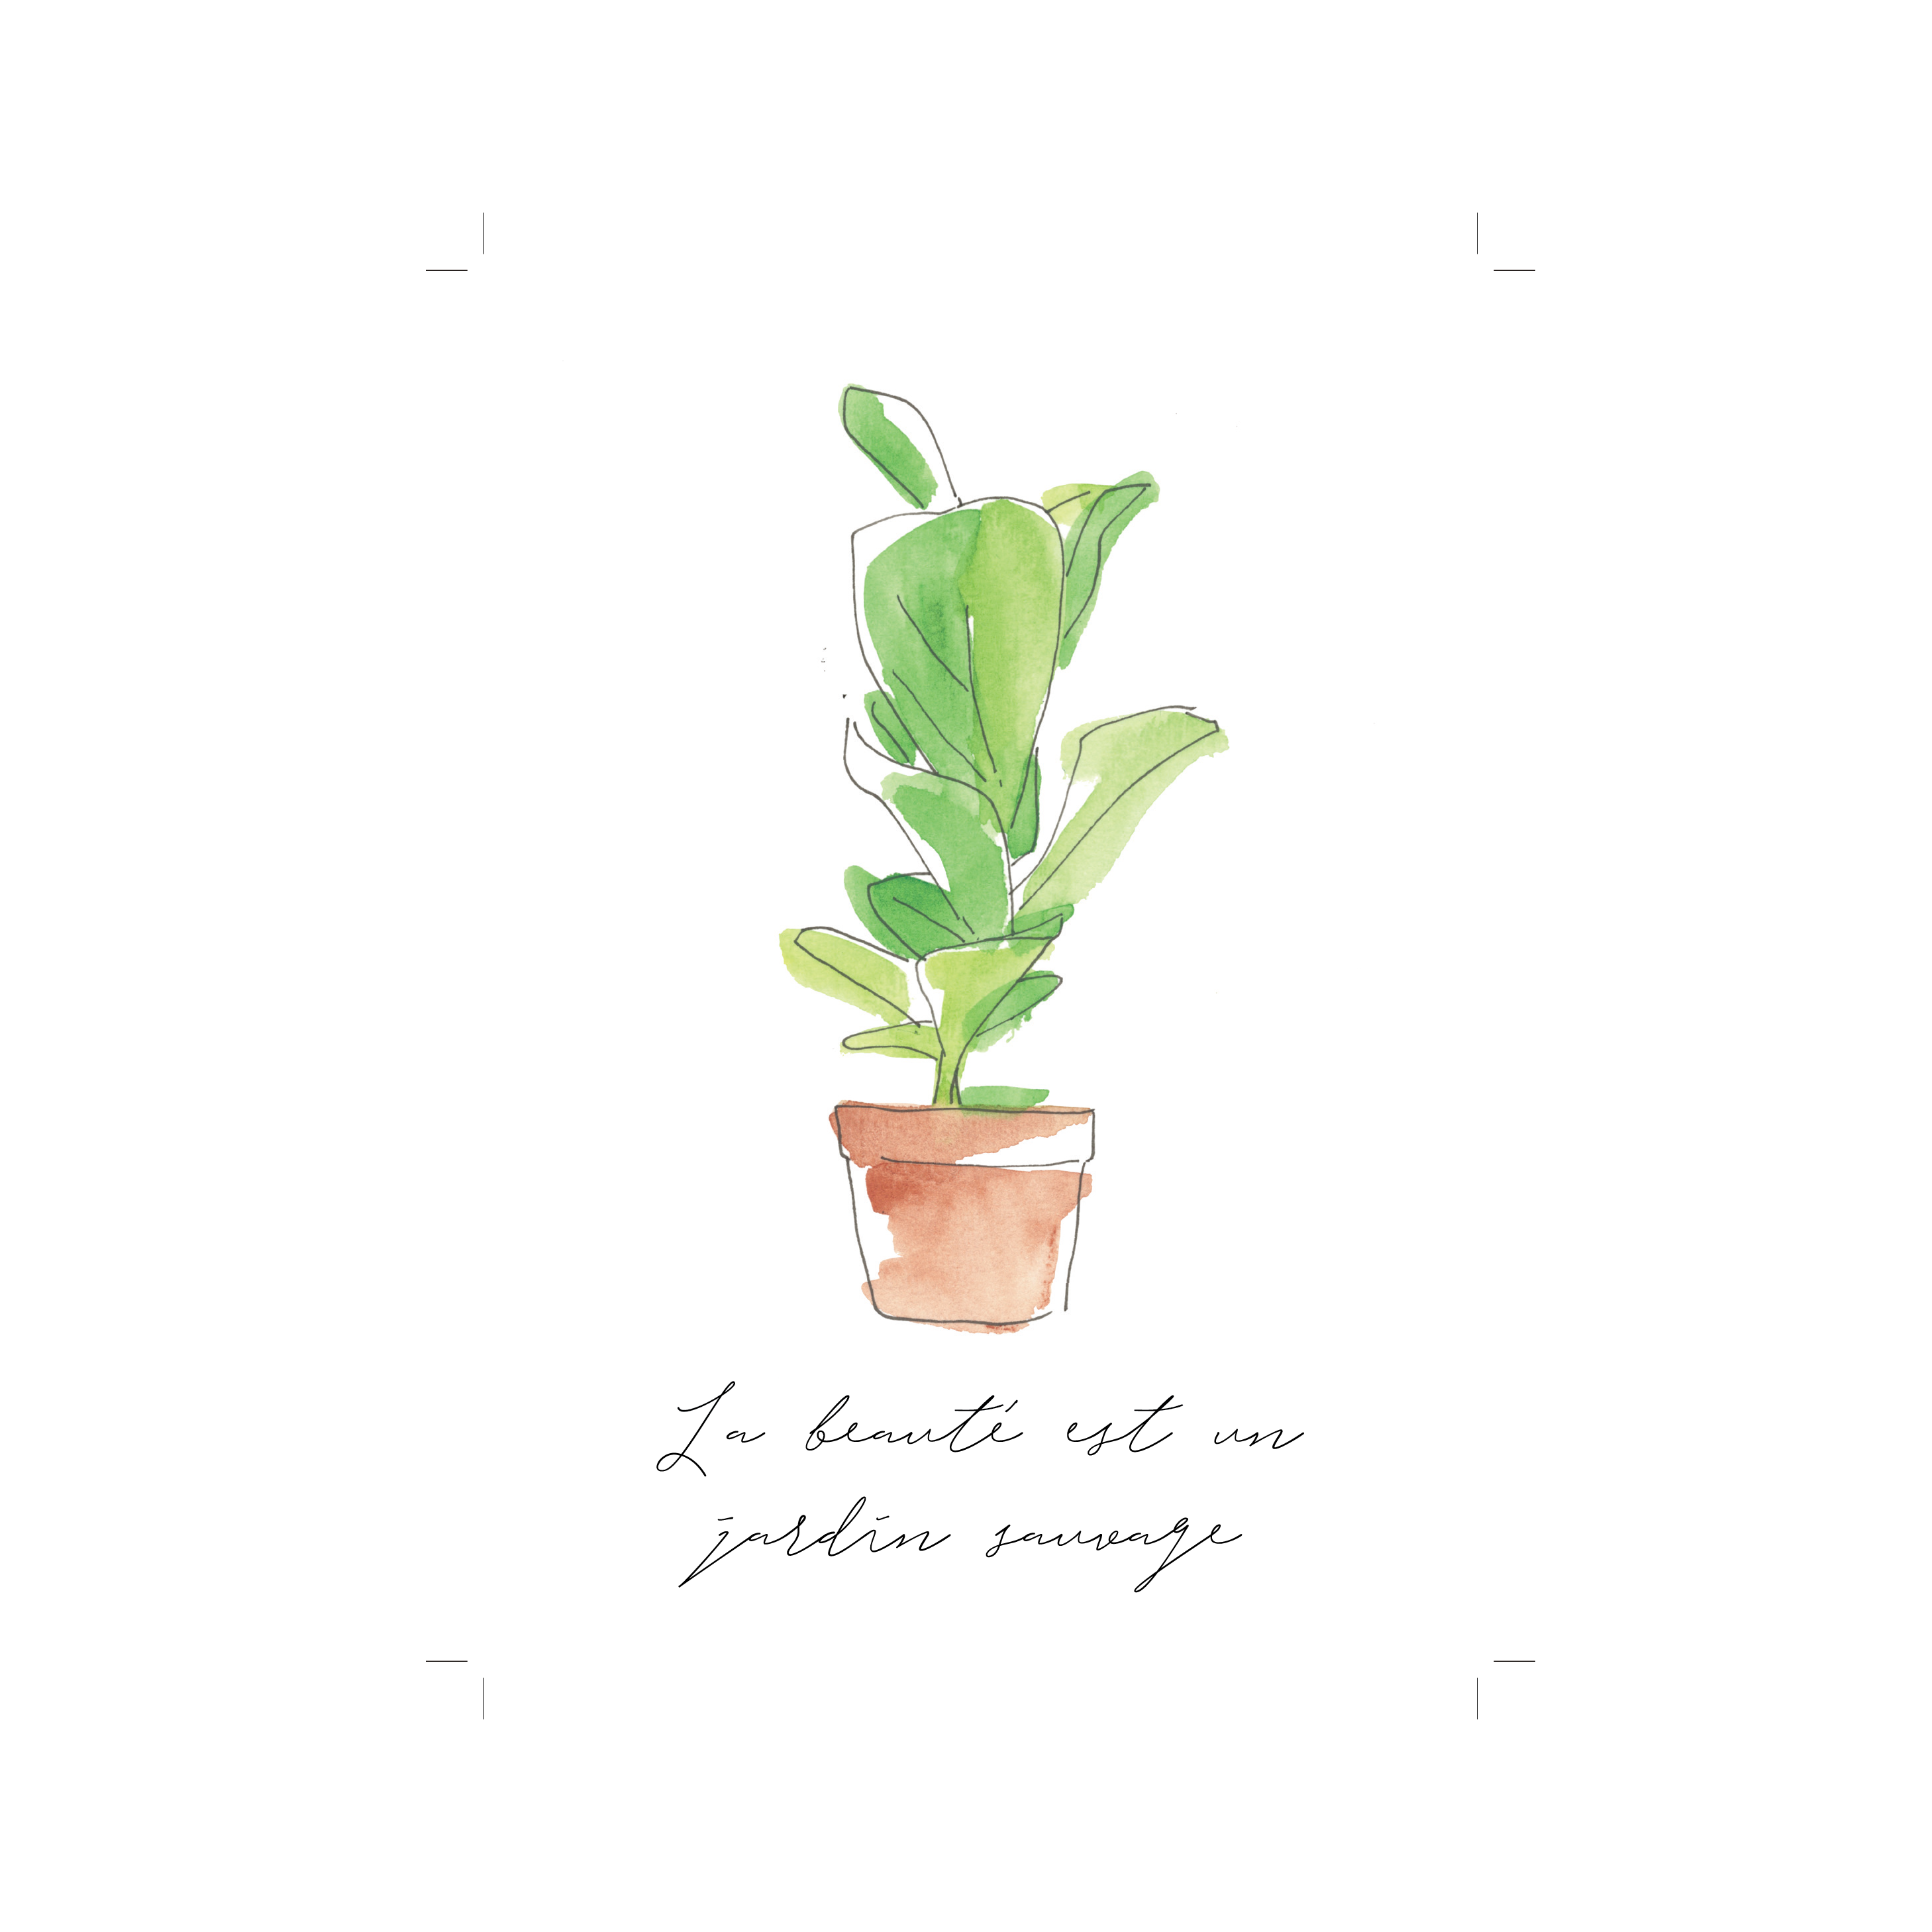 A watercolor print featuring a plant in a pot from one of the top plant nurseries near me.